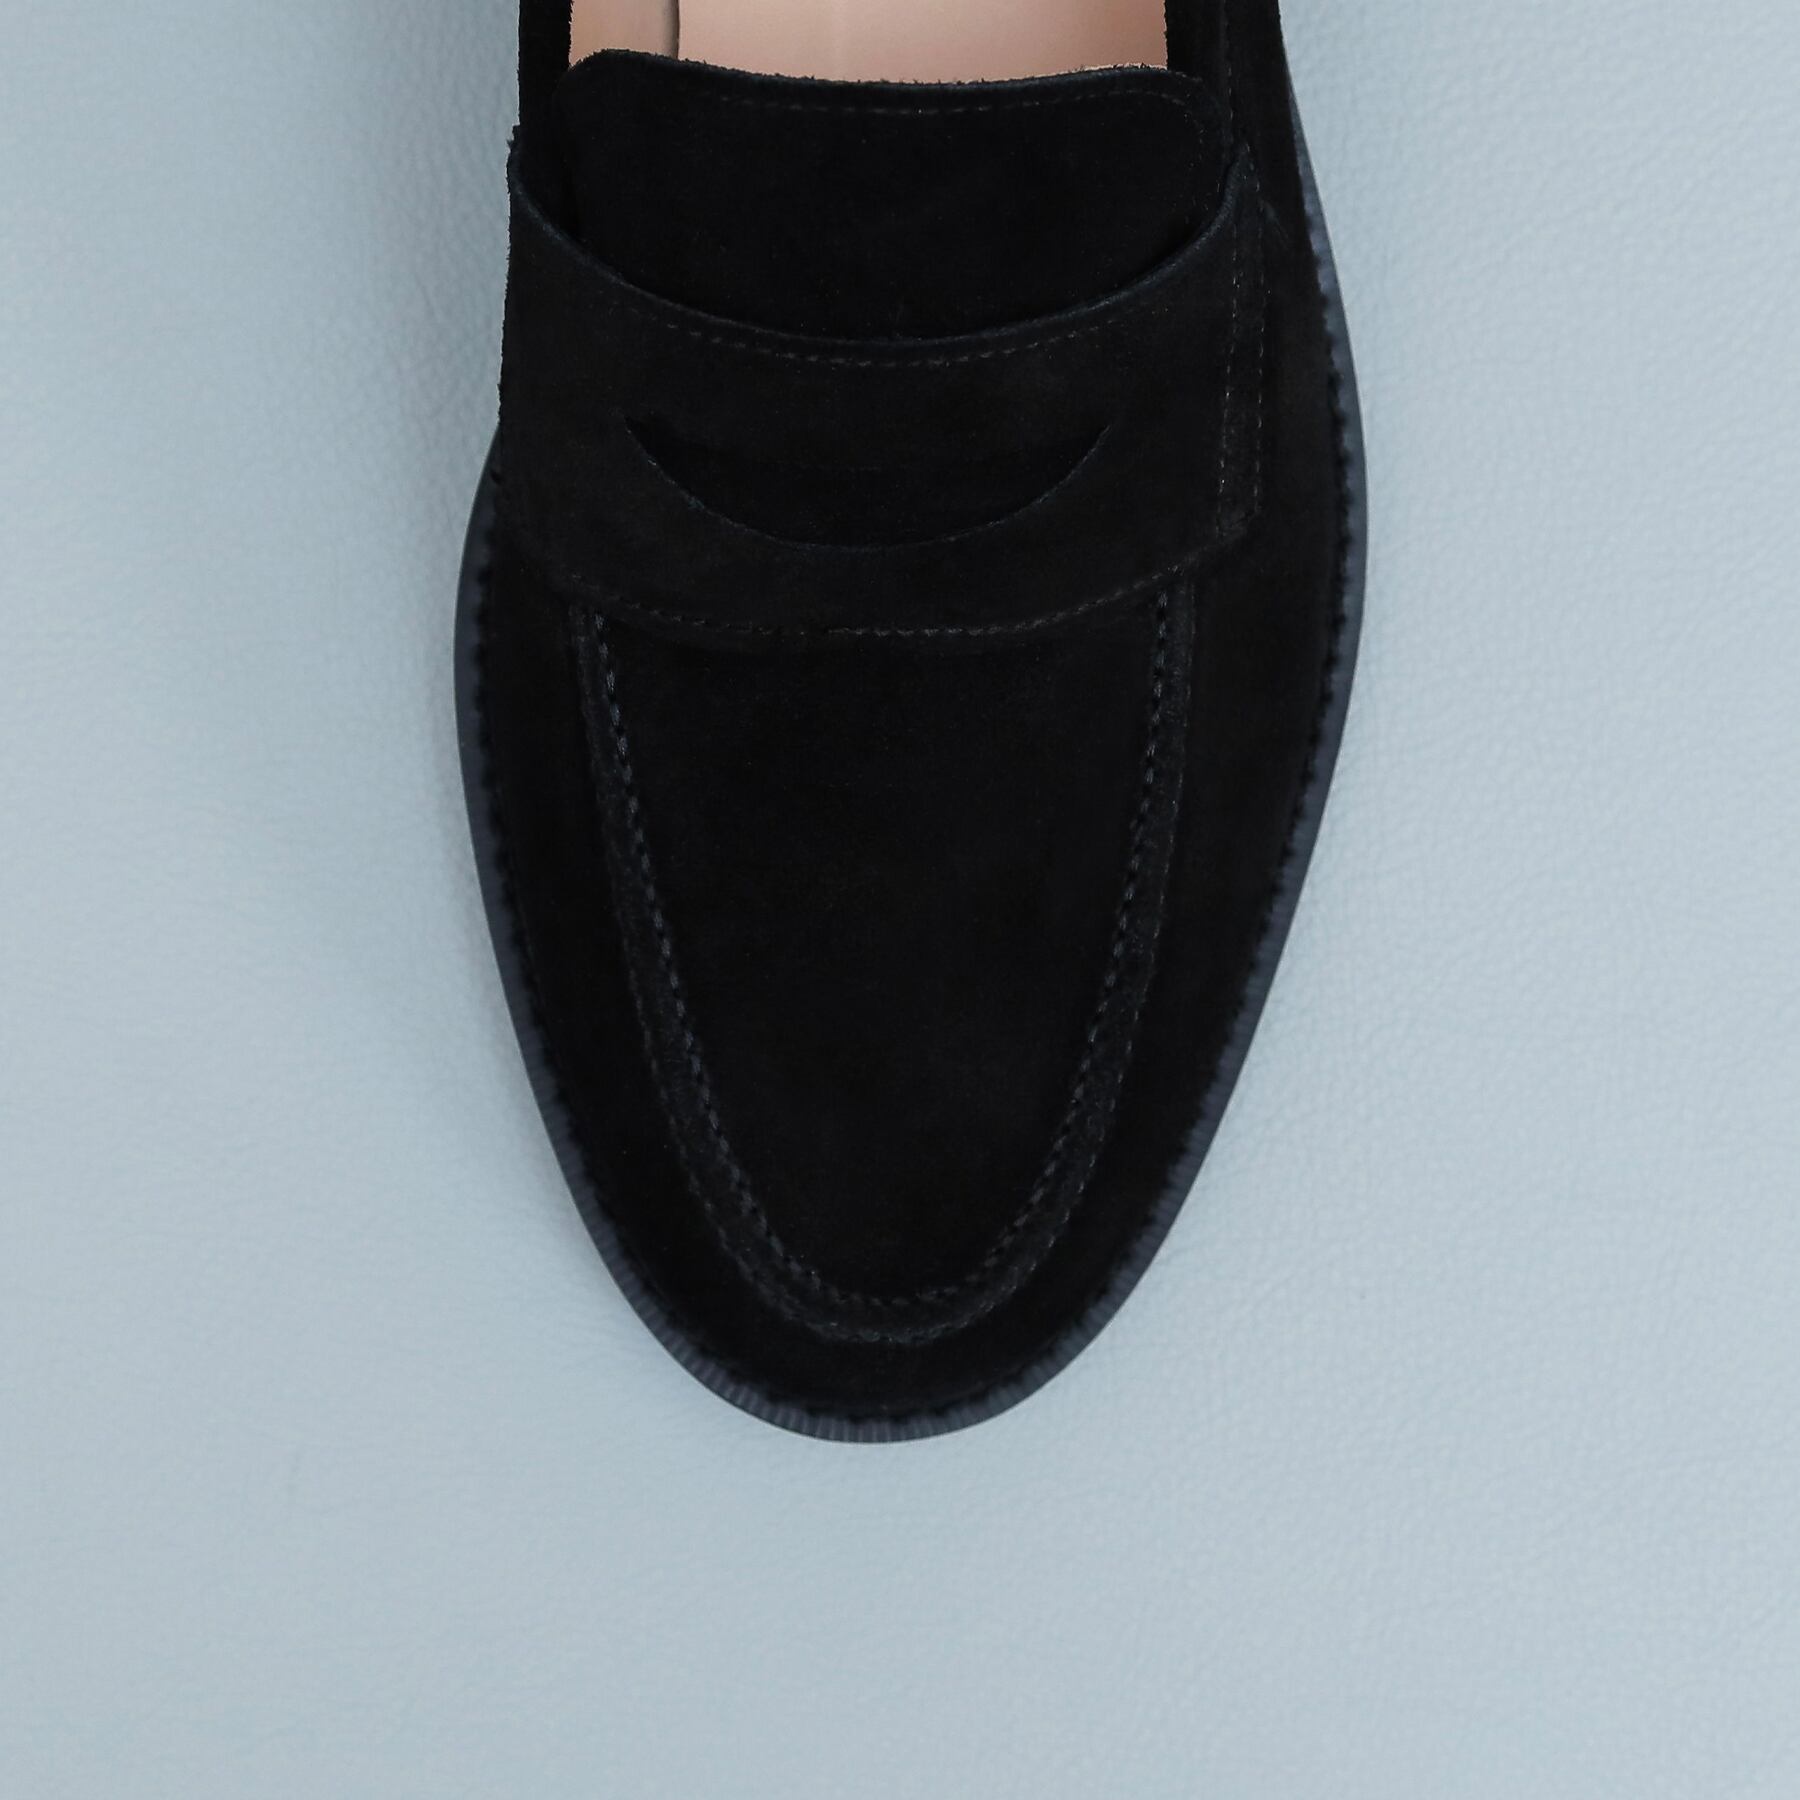 【Iru】CLASSIC COIN LOAFER Suede【受注生産】【10月下旬〜11月上旬 発送予定】 | LIBERTAS公式ショップ  powered by BASE